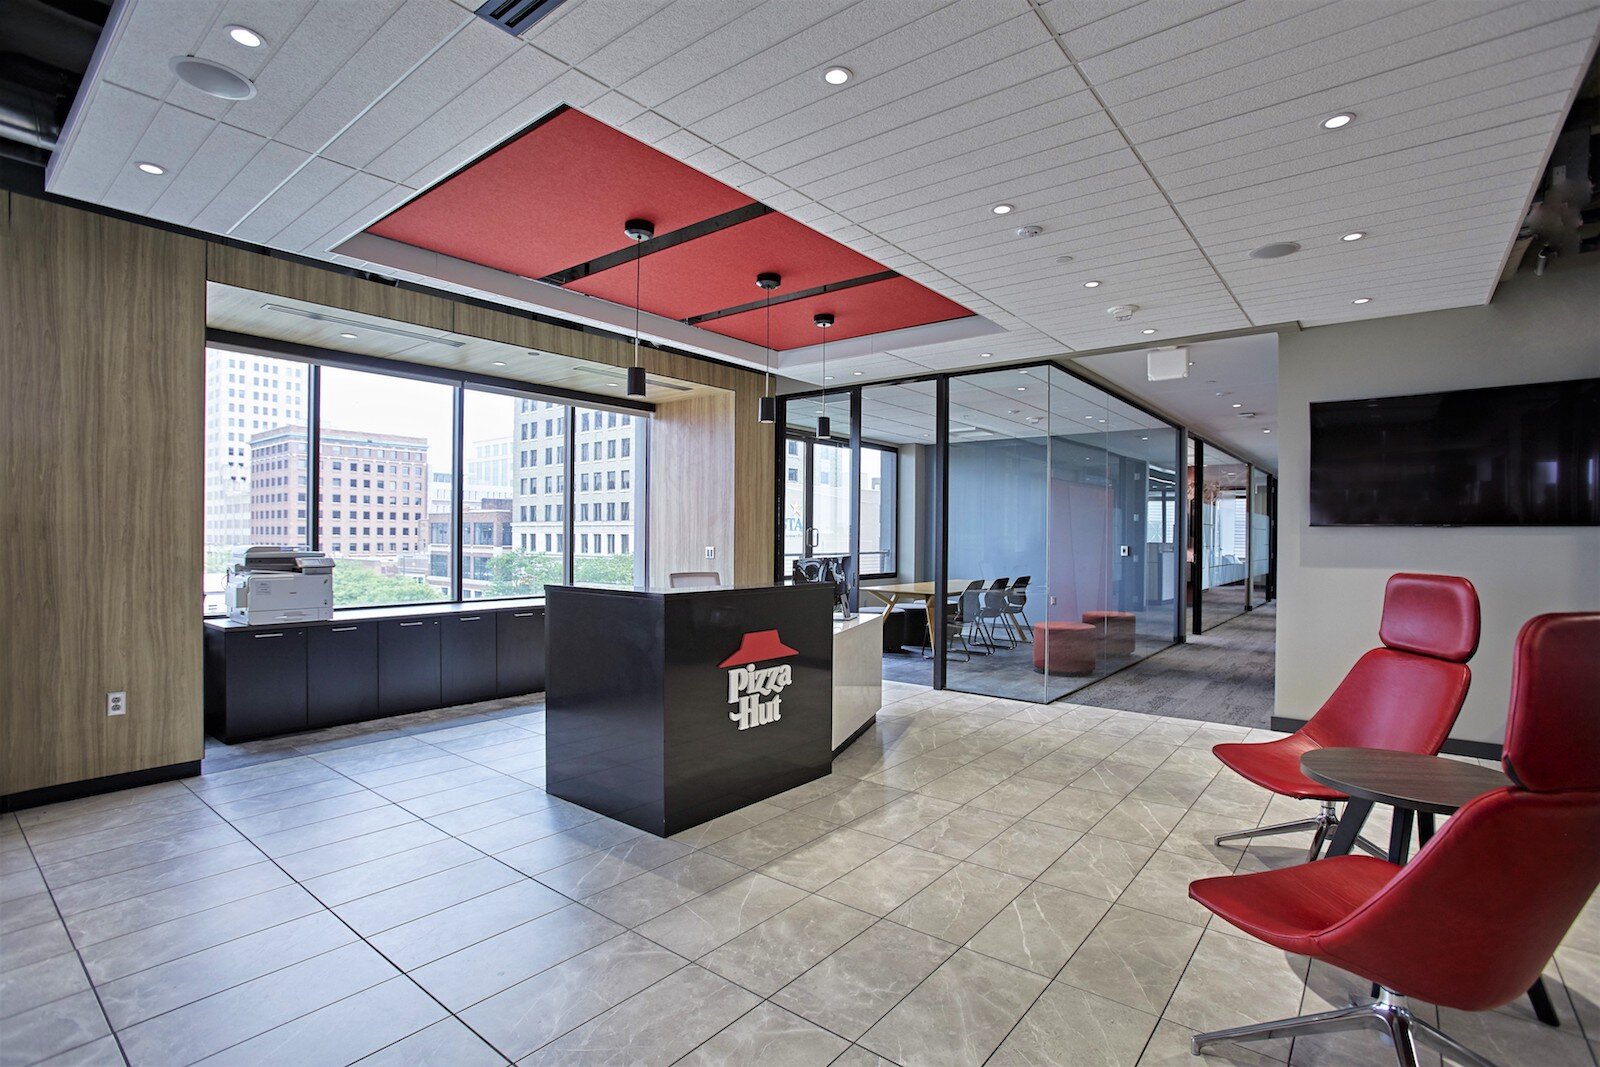 Pizza Hut of Fort Wayne’s headquarters includes an open office concept with several Universal Design features.